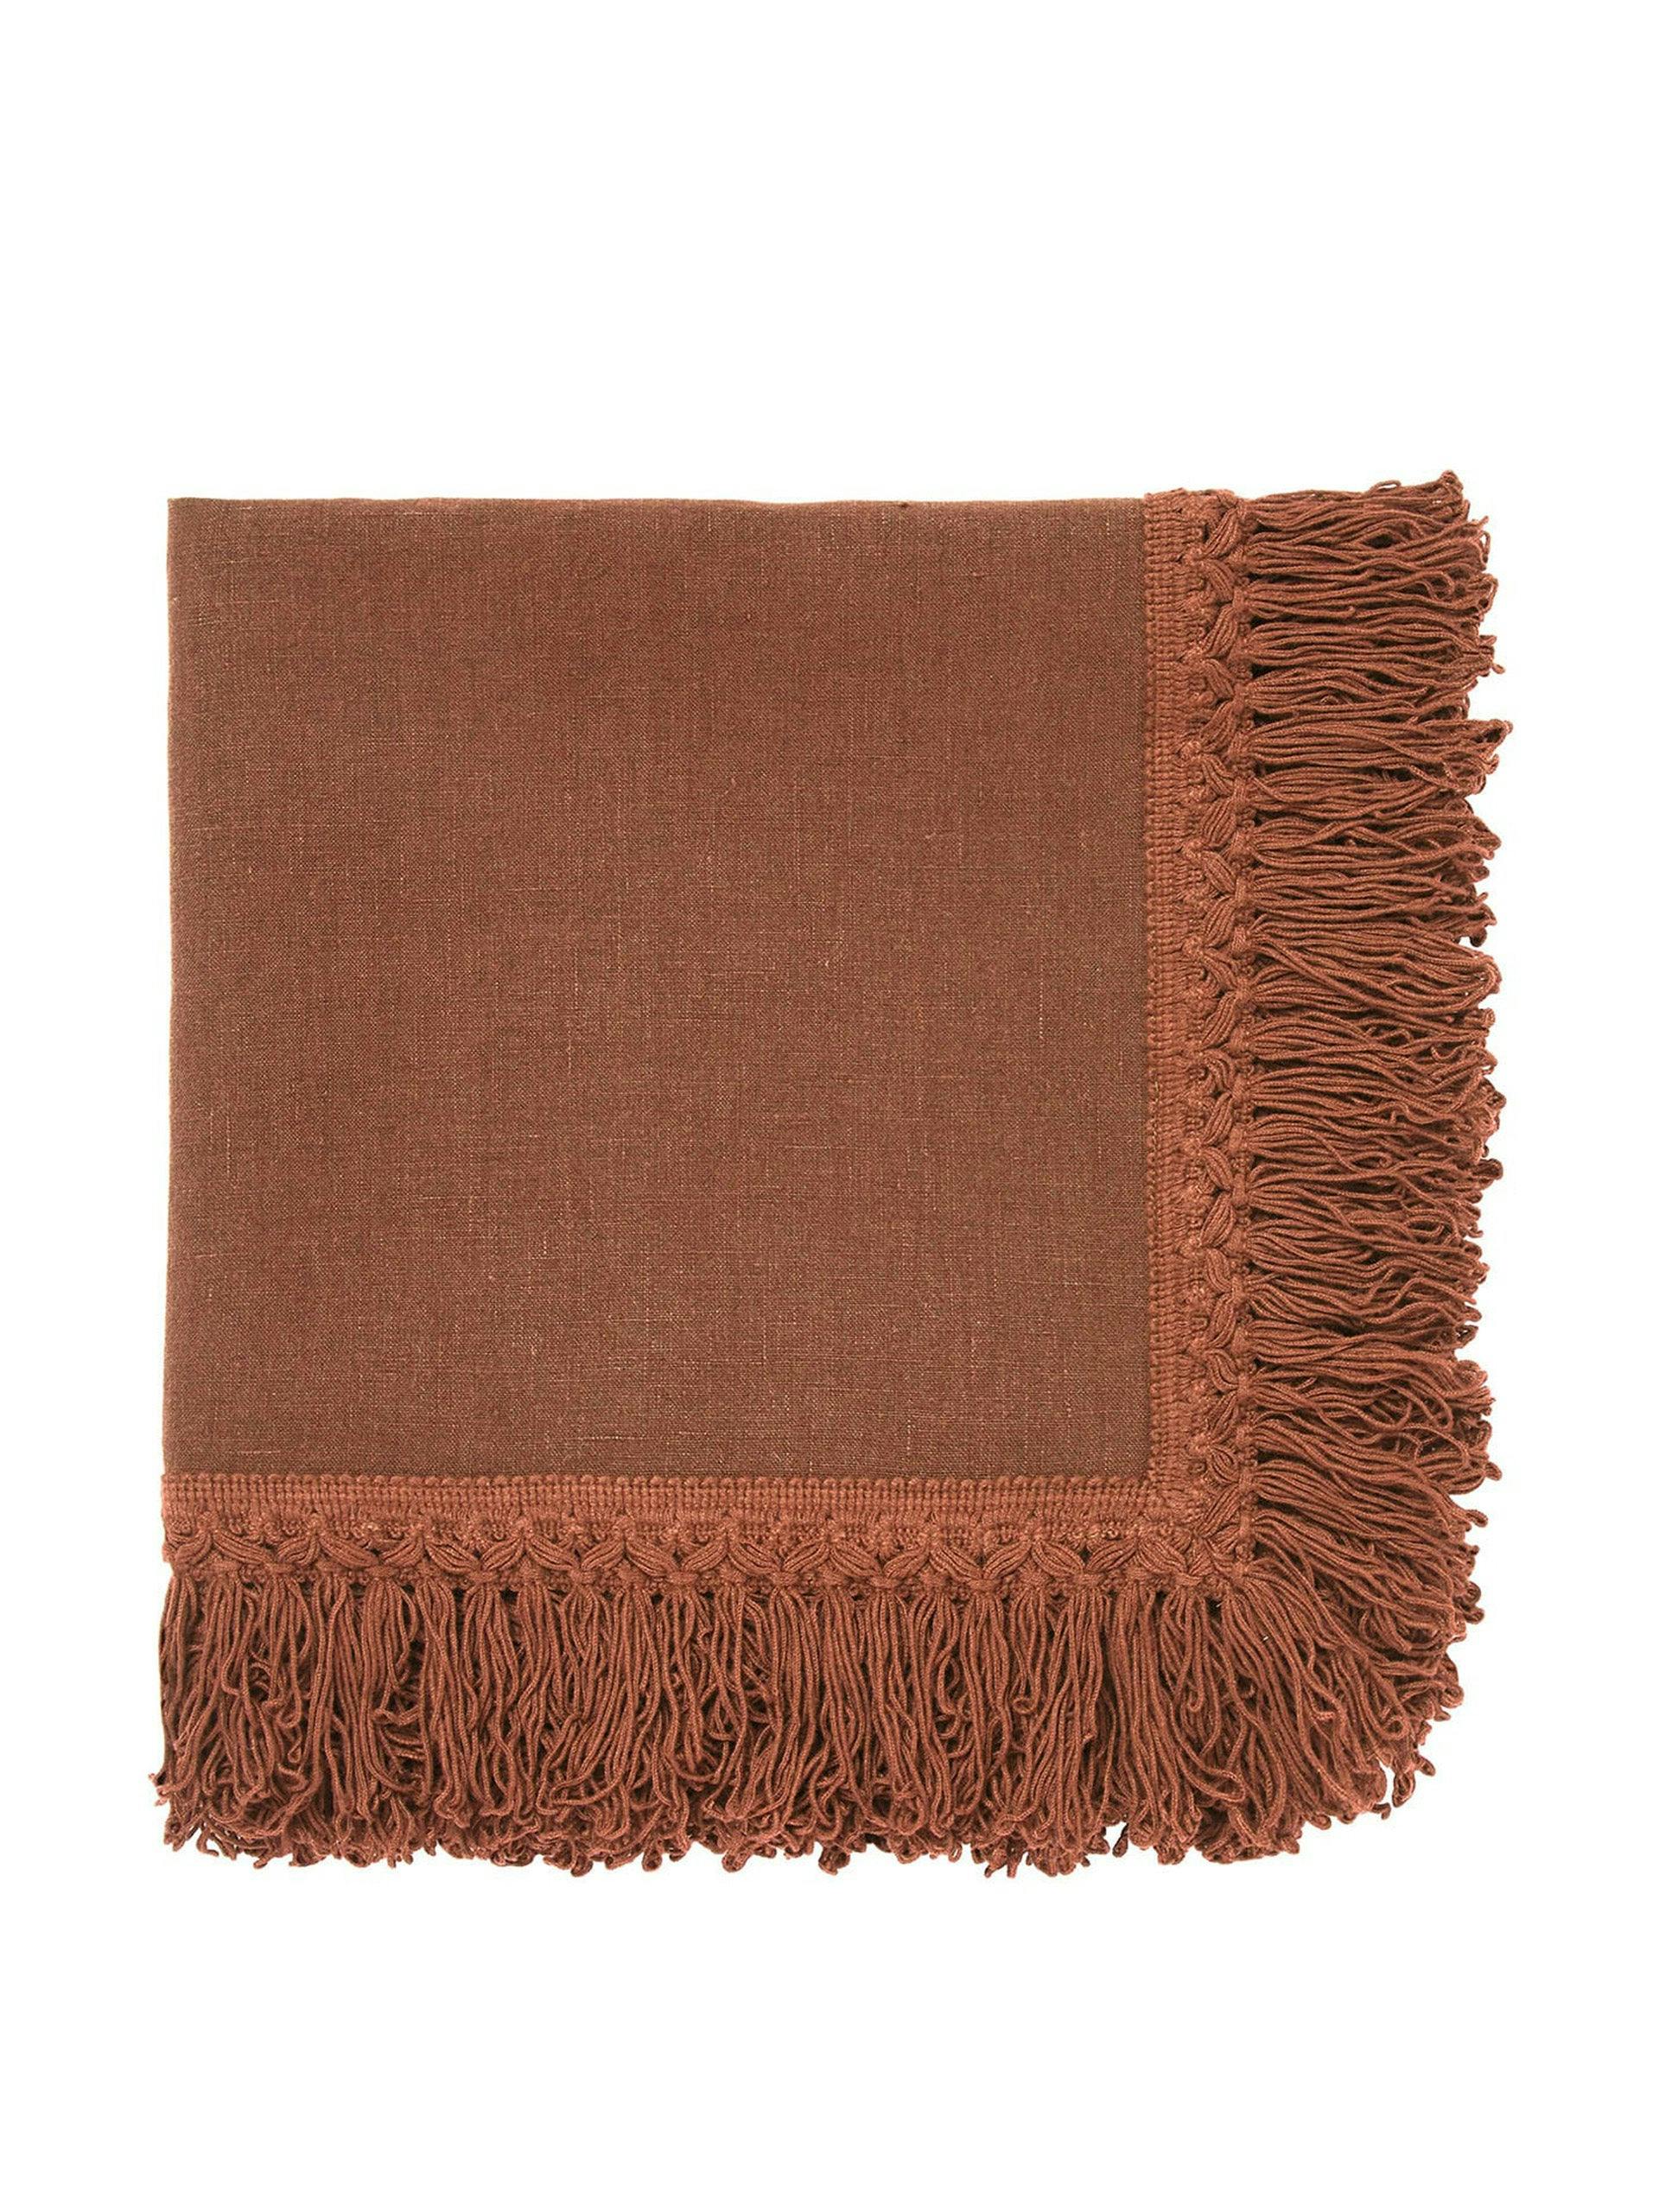 Sequoia napkins with long fringes (set of 4)